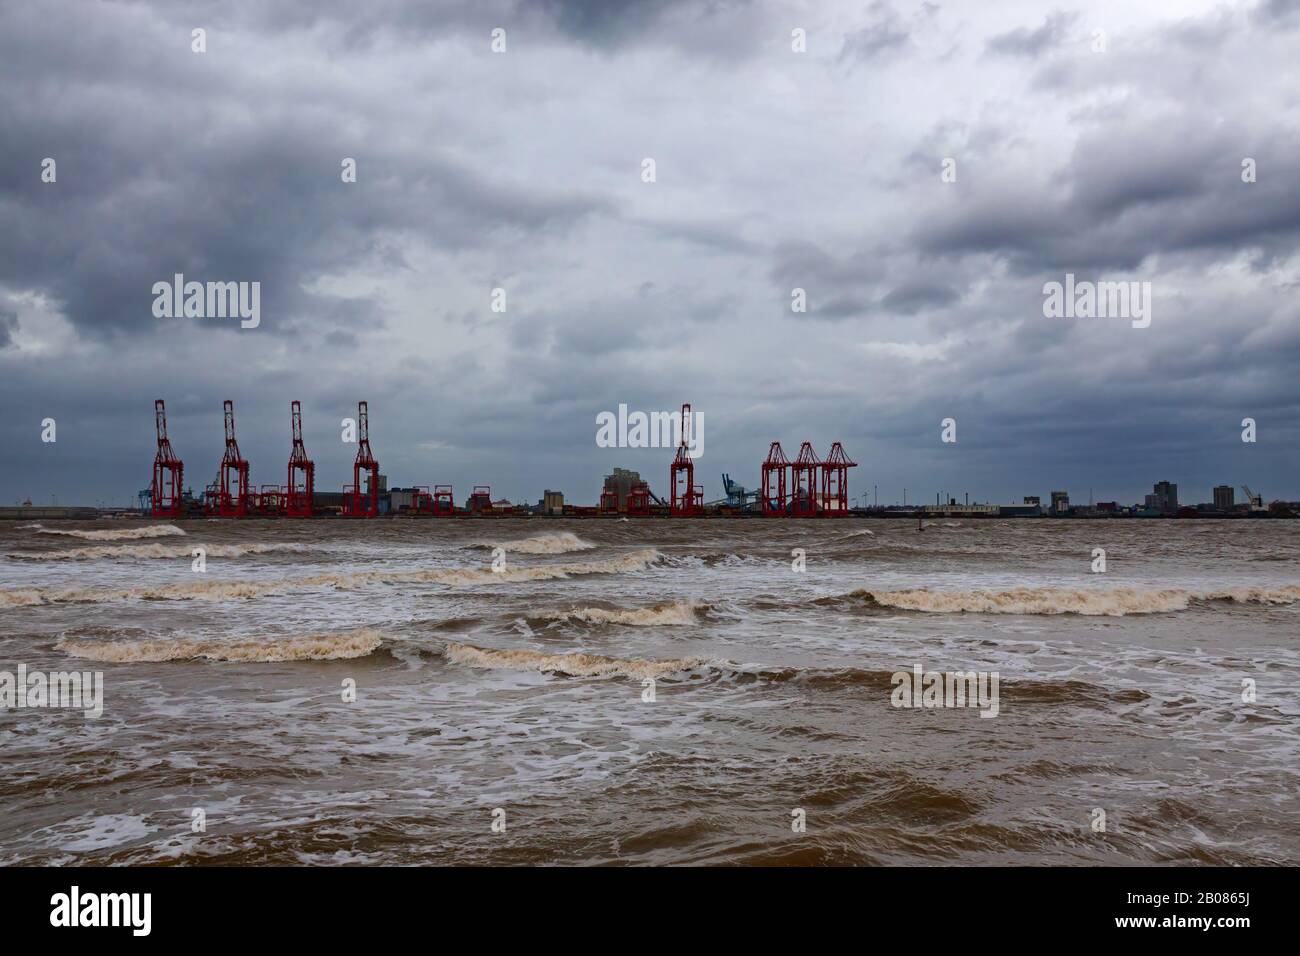 Looking across the River Mersey on a stormy day towards Liverpool 2 docks from New Brighton Wallasey UK Stock Photo